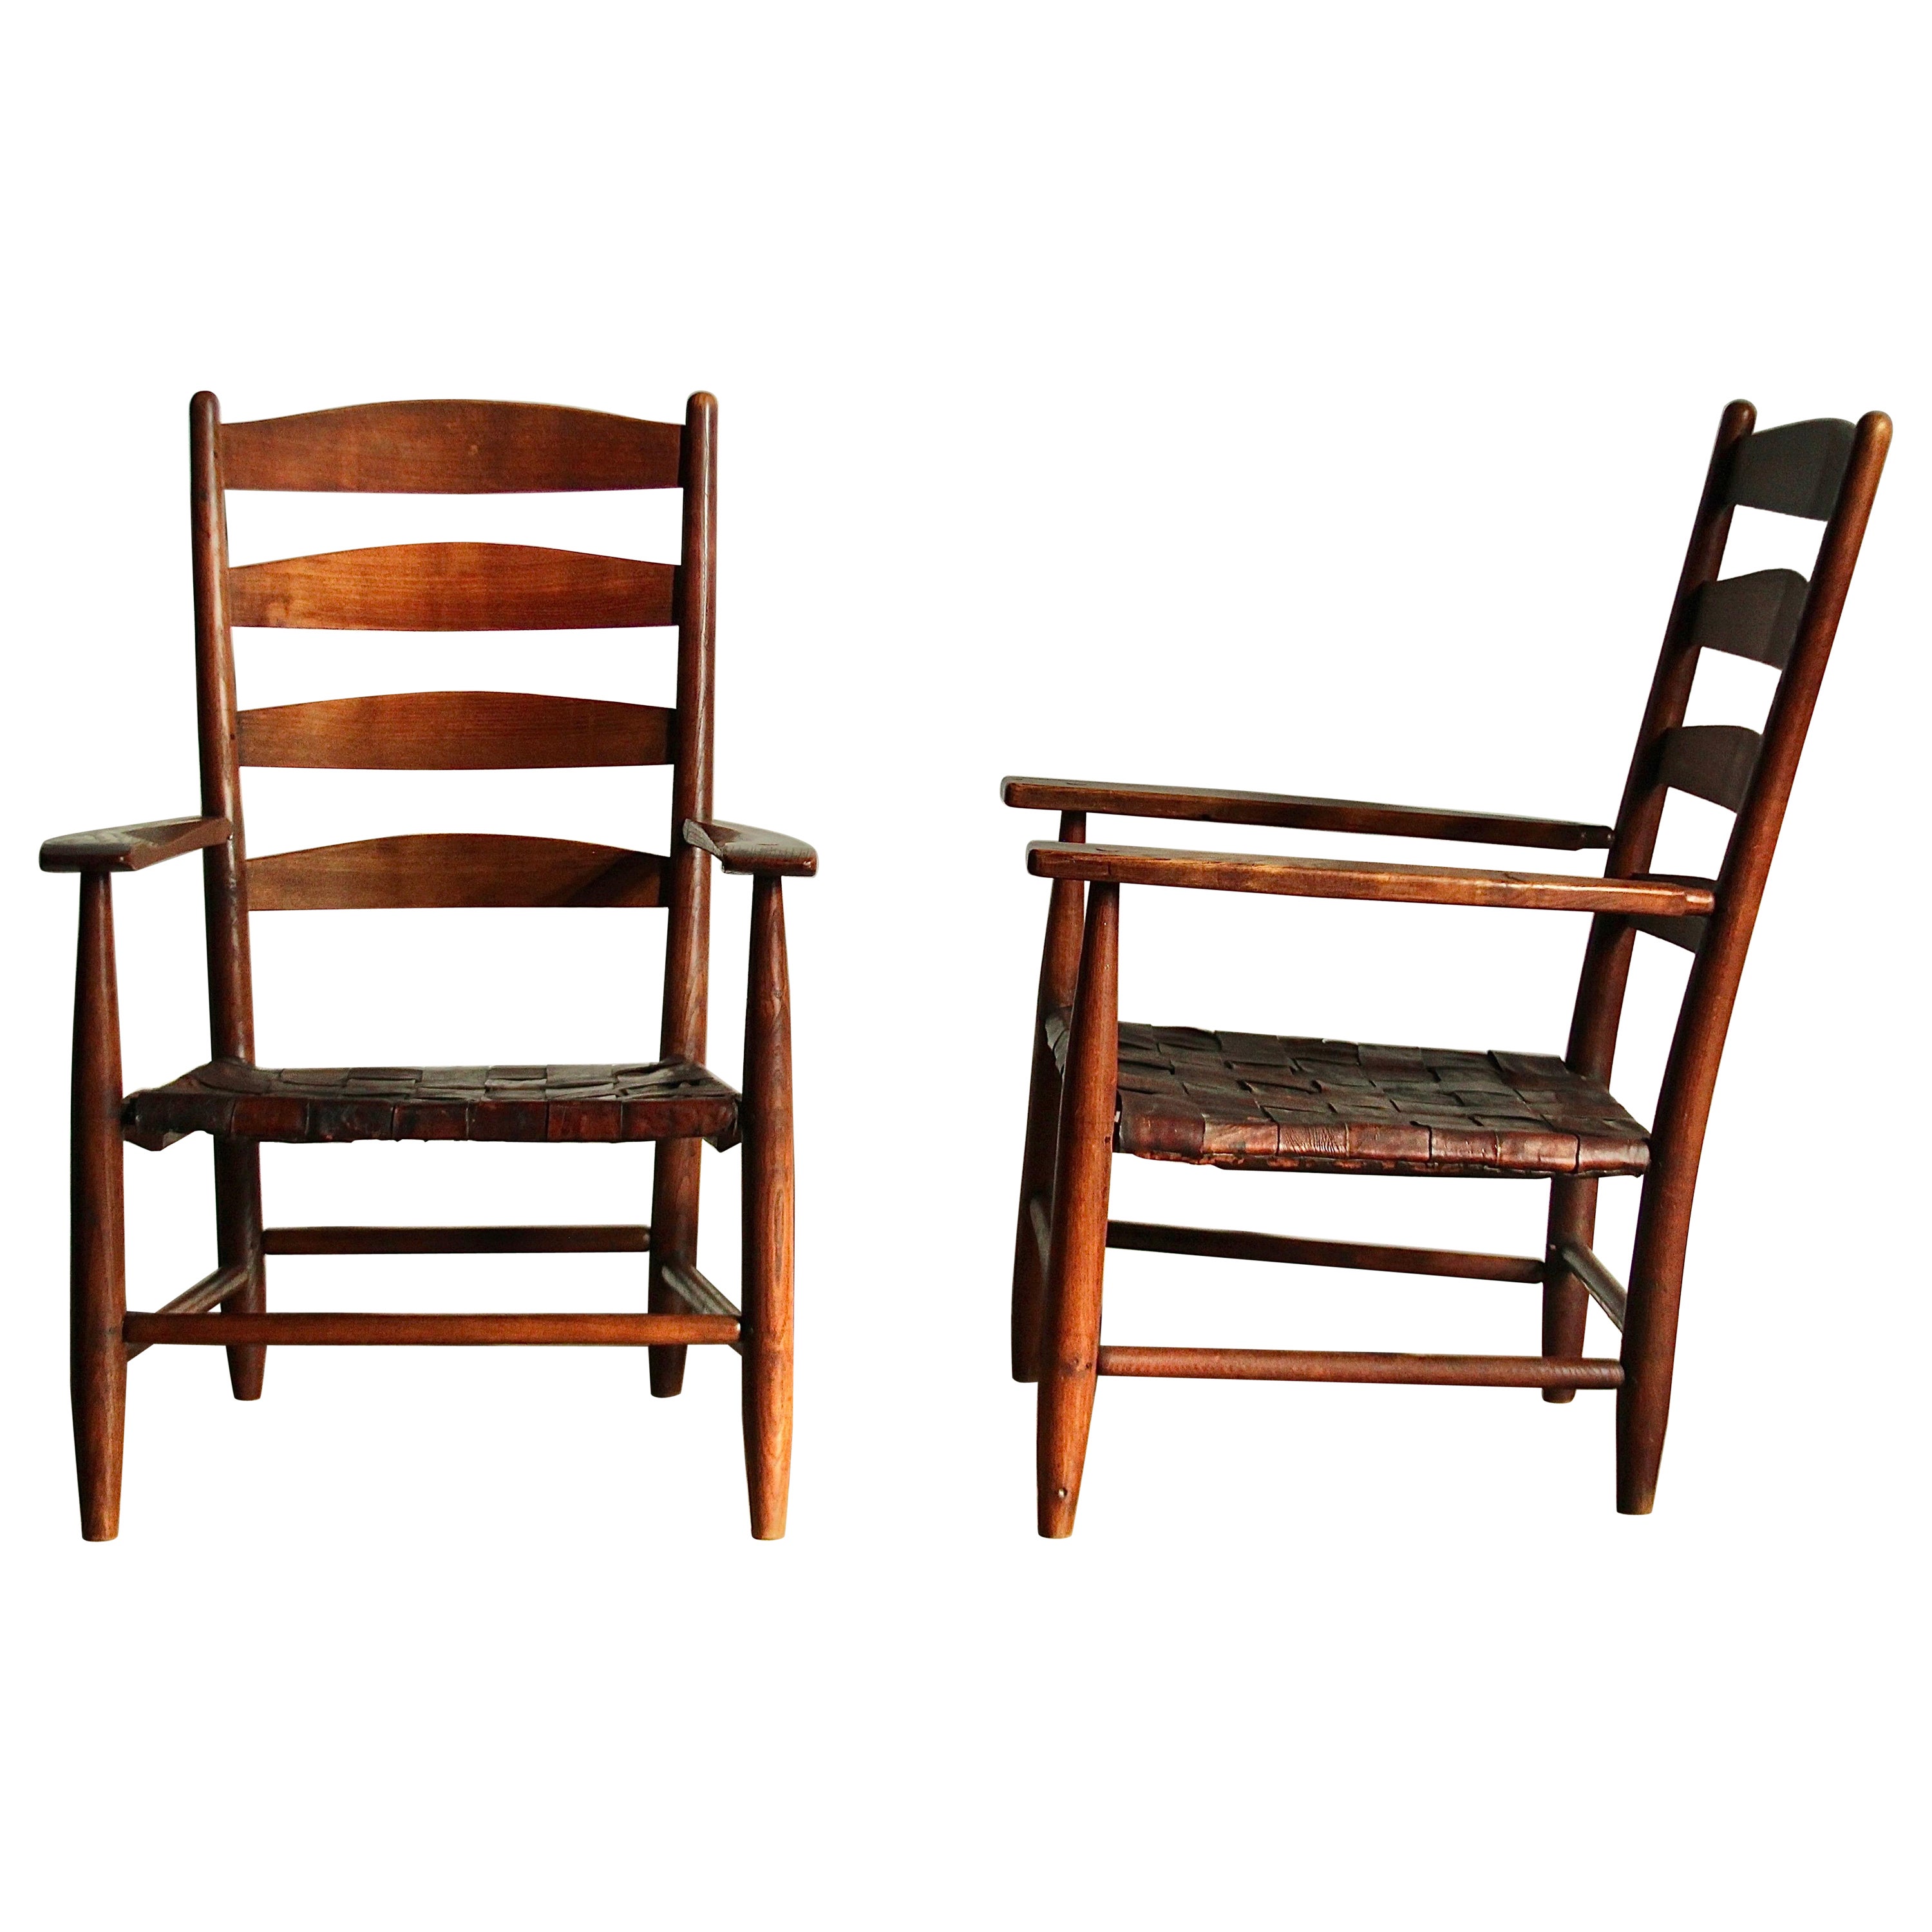 Gordon Russell Hand Built Ladder Back Oak & Woven Leather Lounge Chairs, 1904